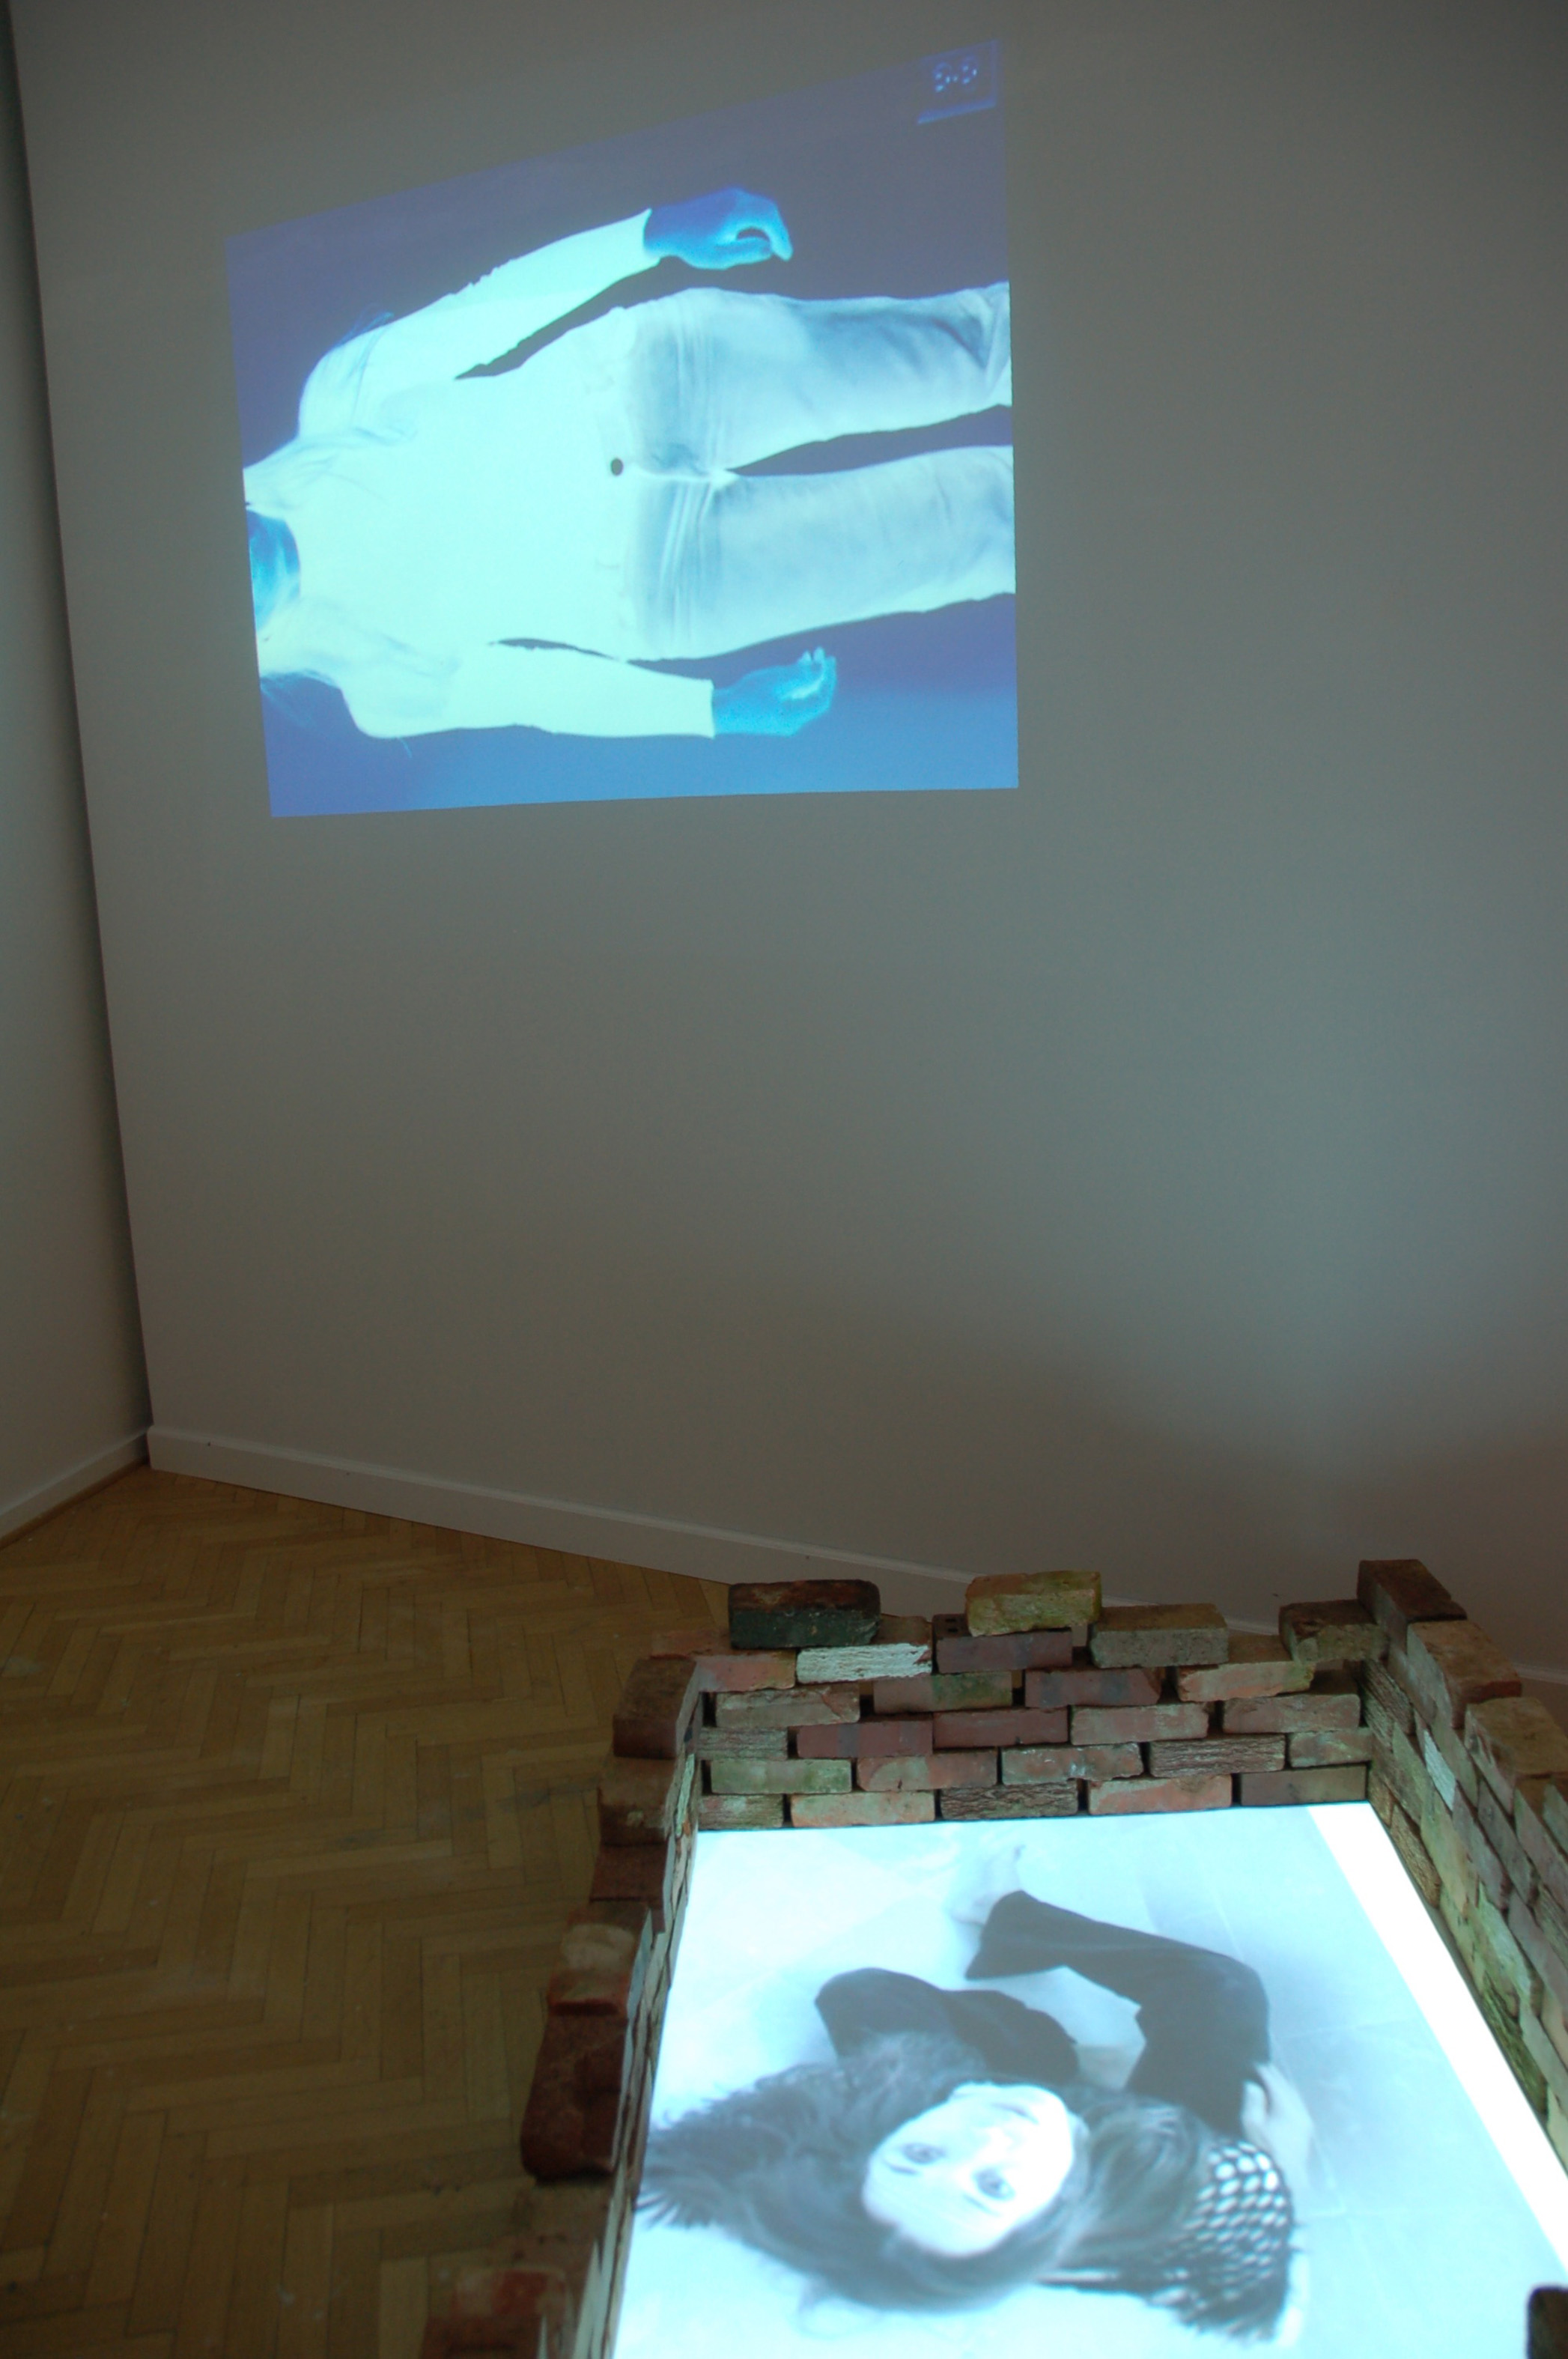  Aseptic Profile Video Installation 2010   